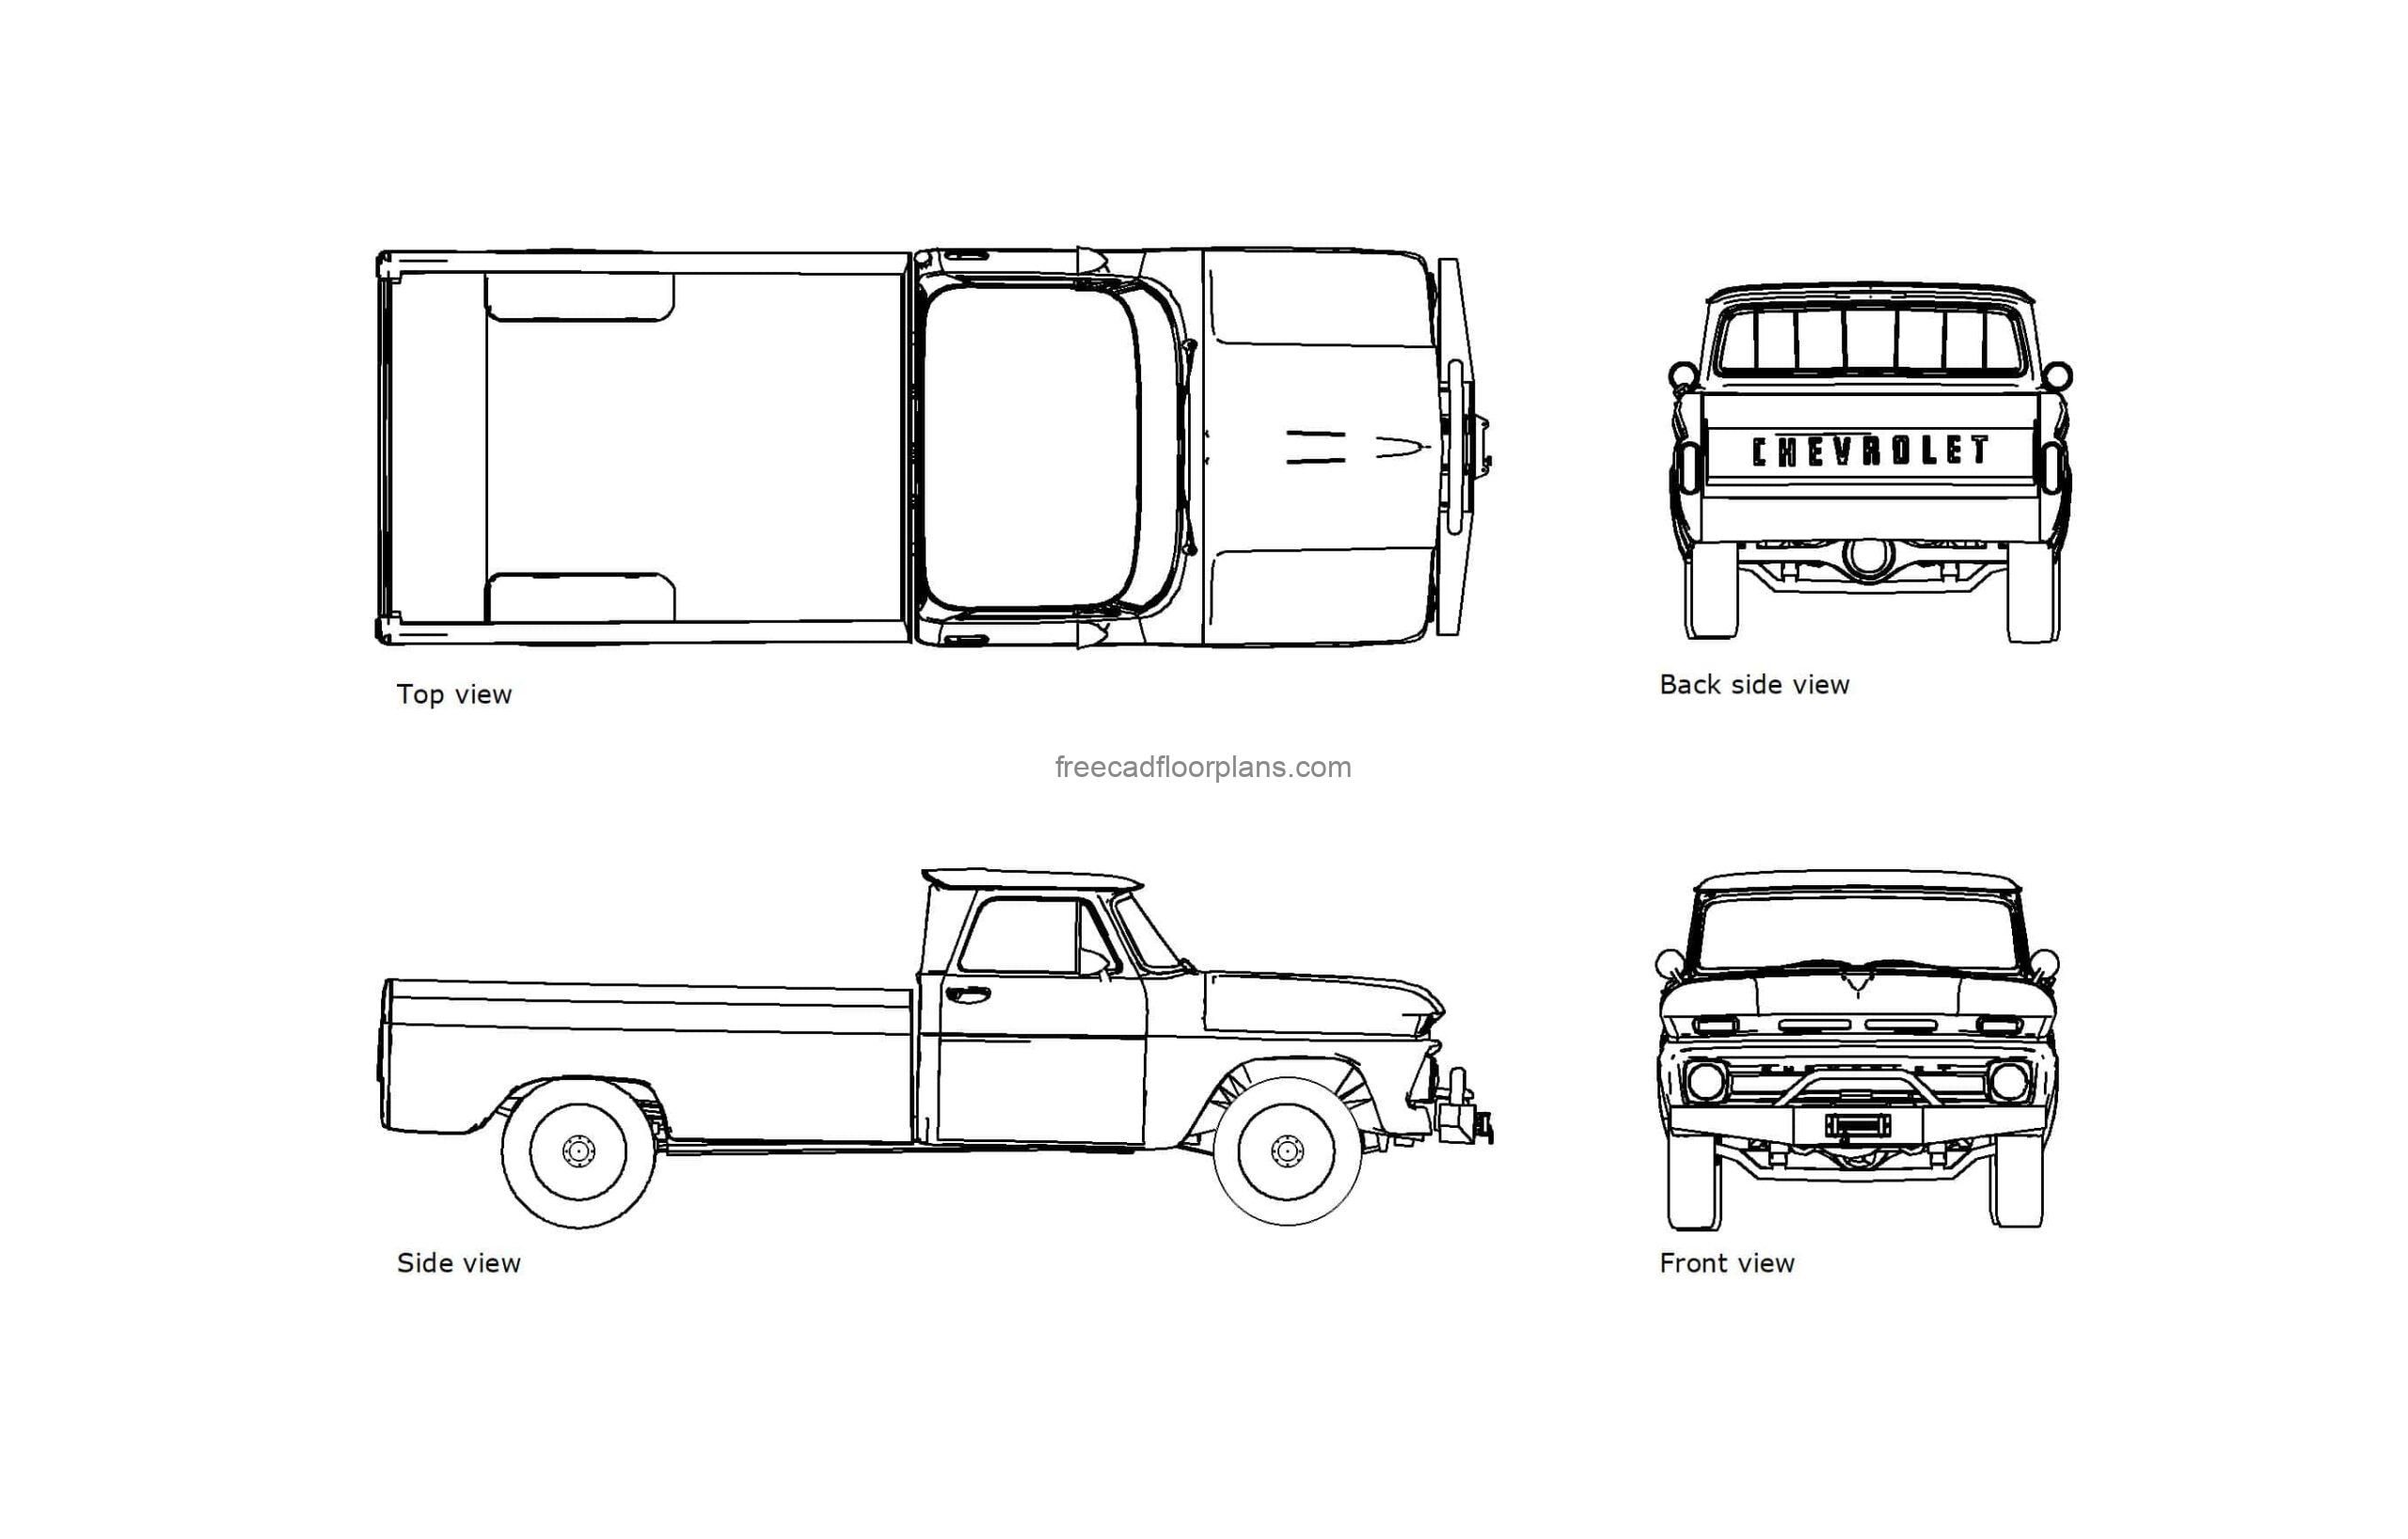 autocad drawing of an old pick up truck, 2d plan and elevation views, dwg file free for download